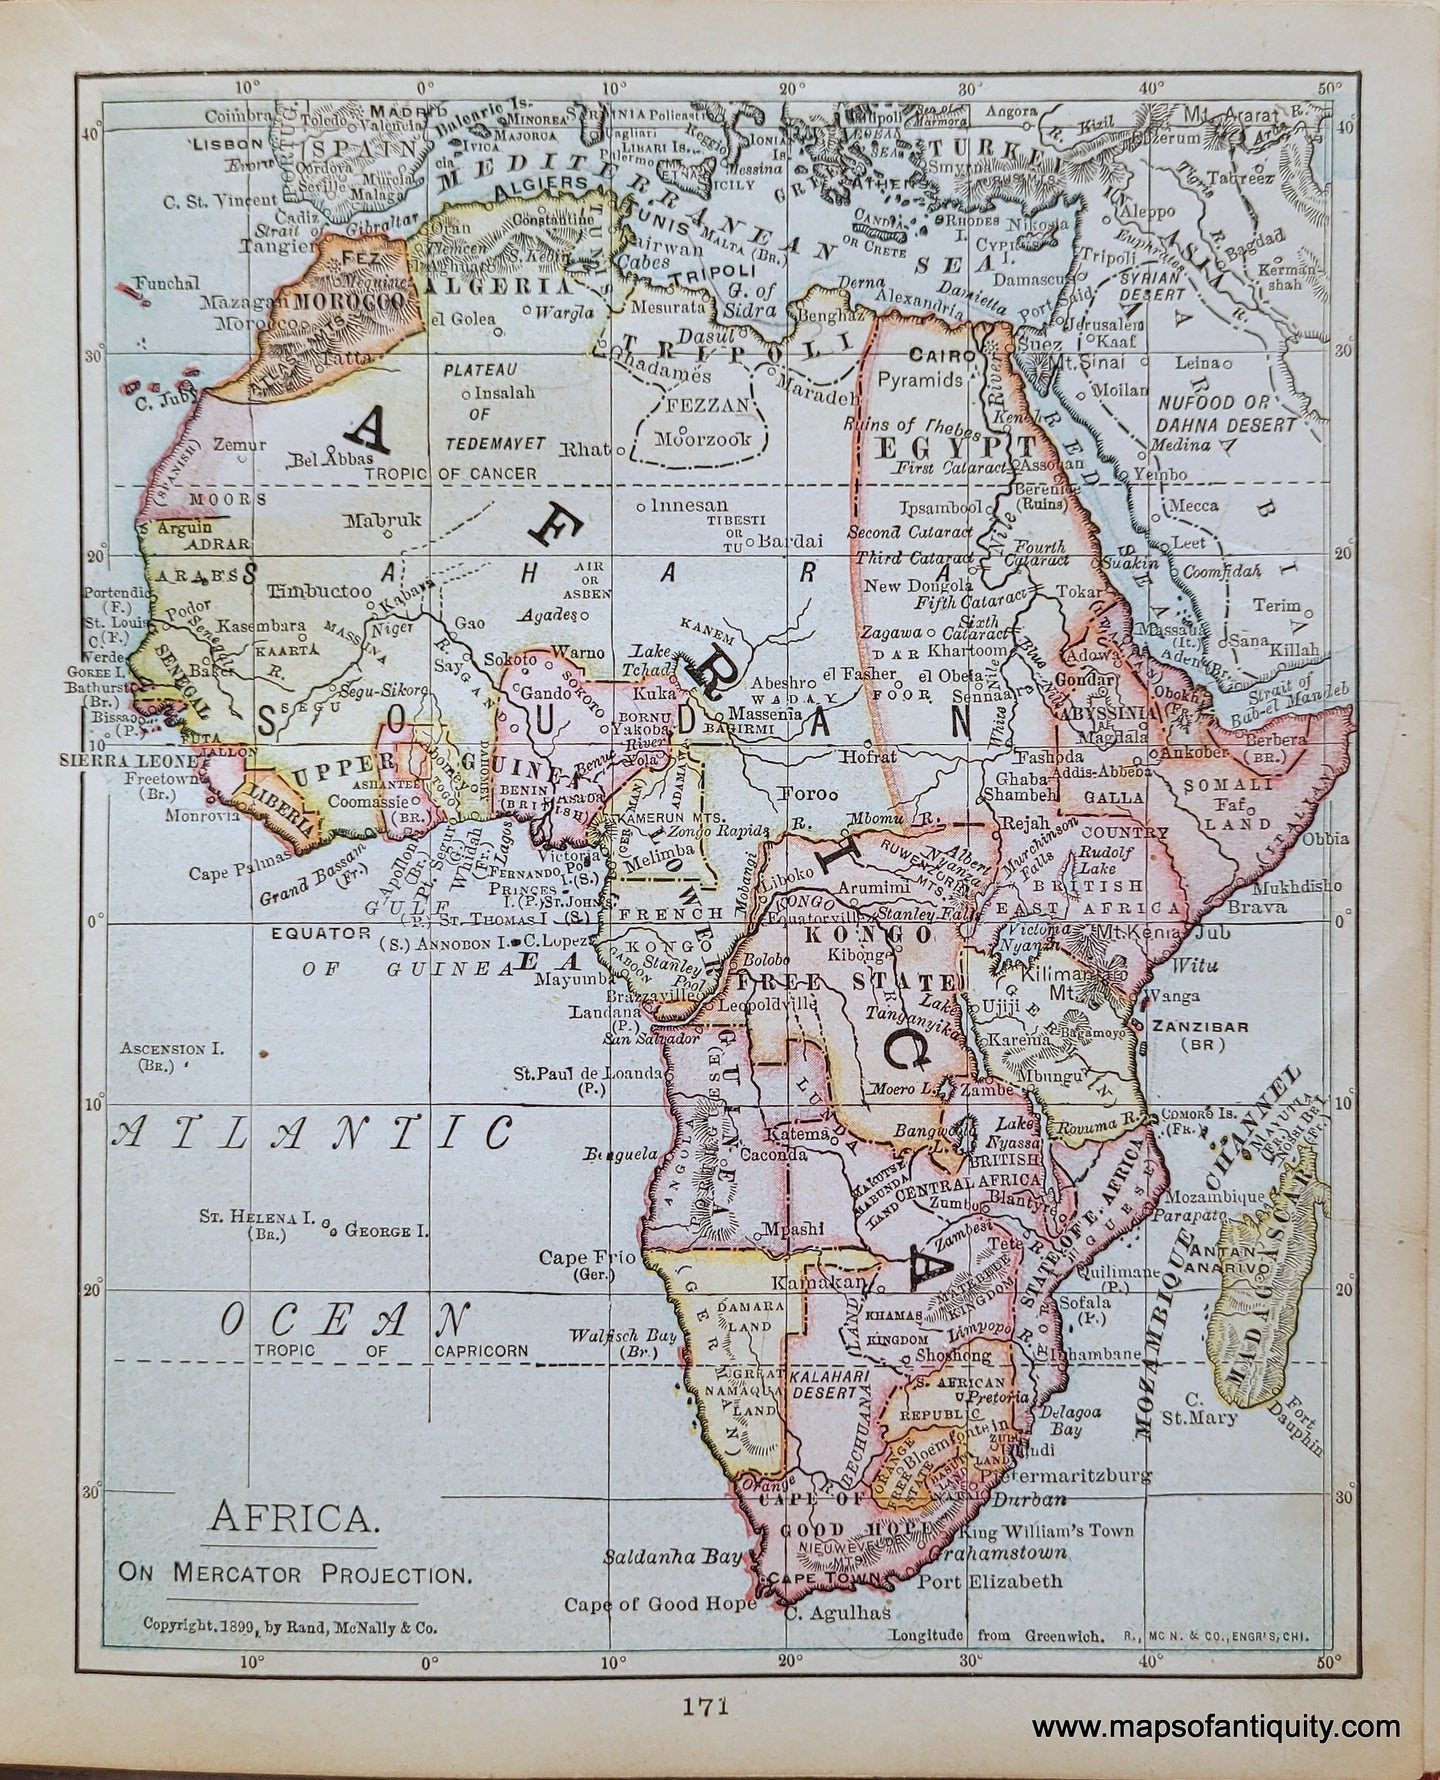 Genuine-Antique-Map-Africa-1900-Rand-McNally-Maps-Of-Antiquity